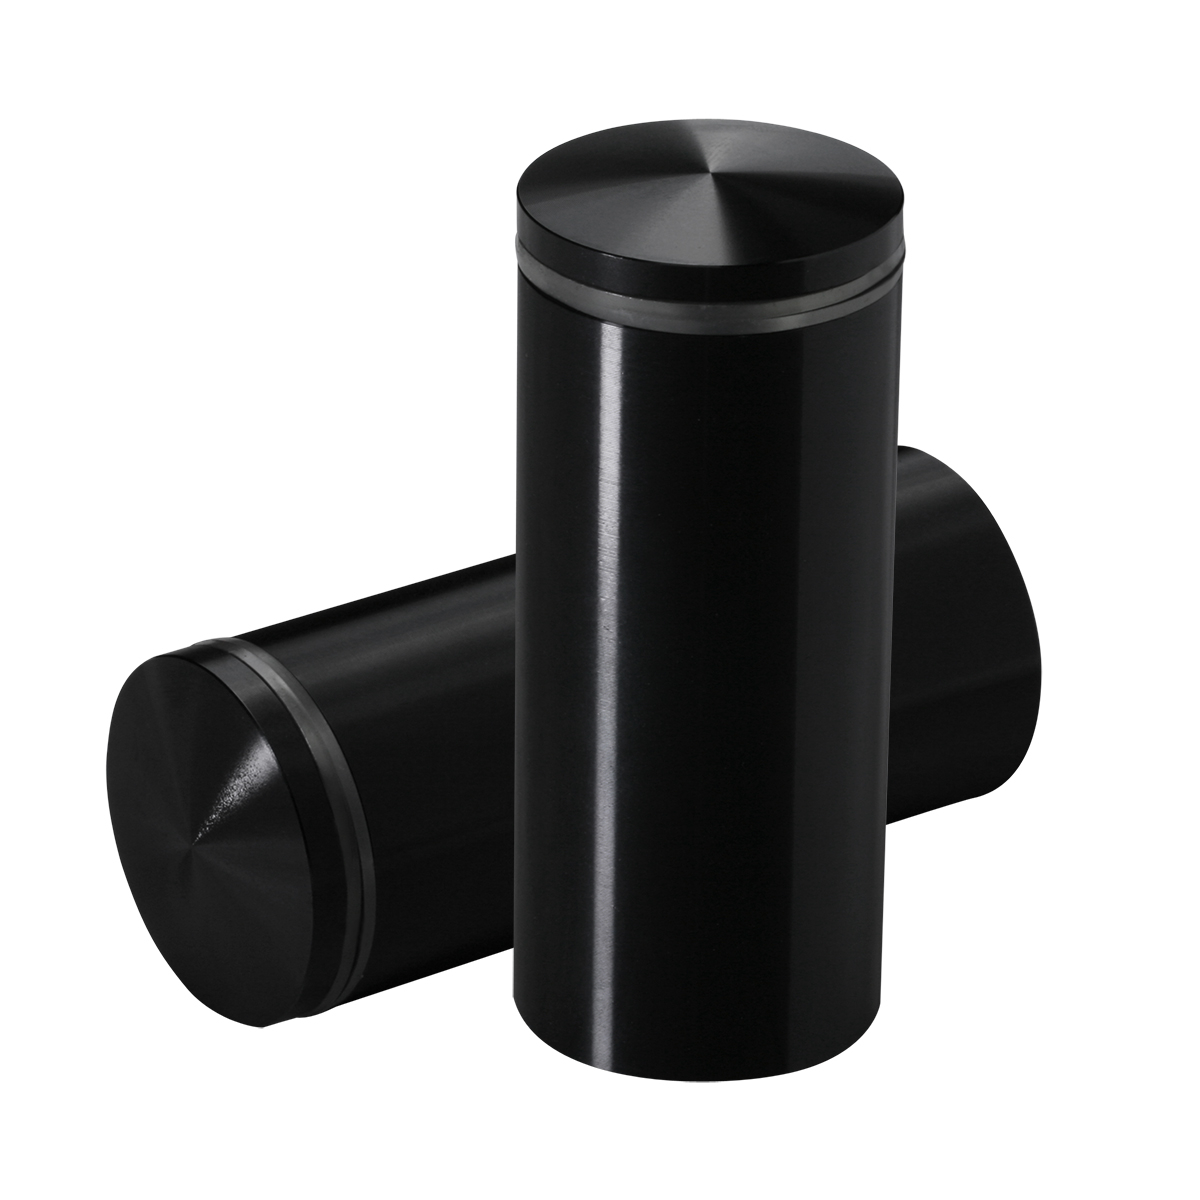 1-1/4'' Diameter X 2-1/2'' Barrel Length, Aluminum Rounded Head Standoffs, Black Anodized Finish Easy Fasten Standoff (For Inside / Outside use) [Required Material Hole Size: 7/16'']